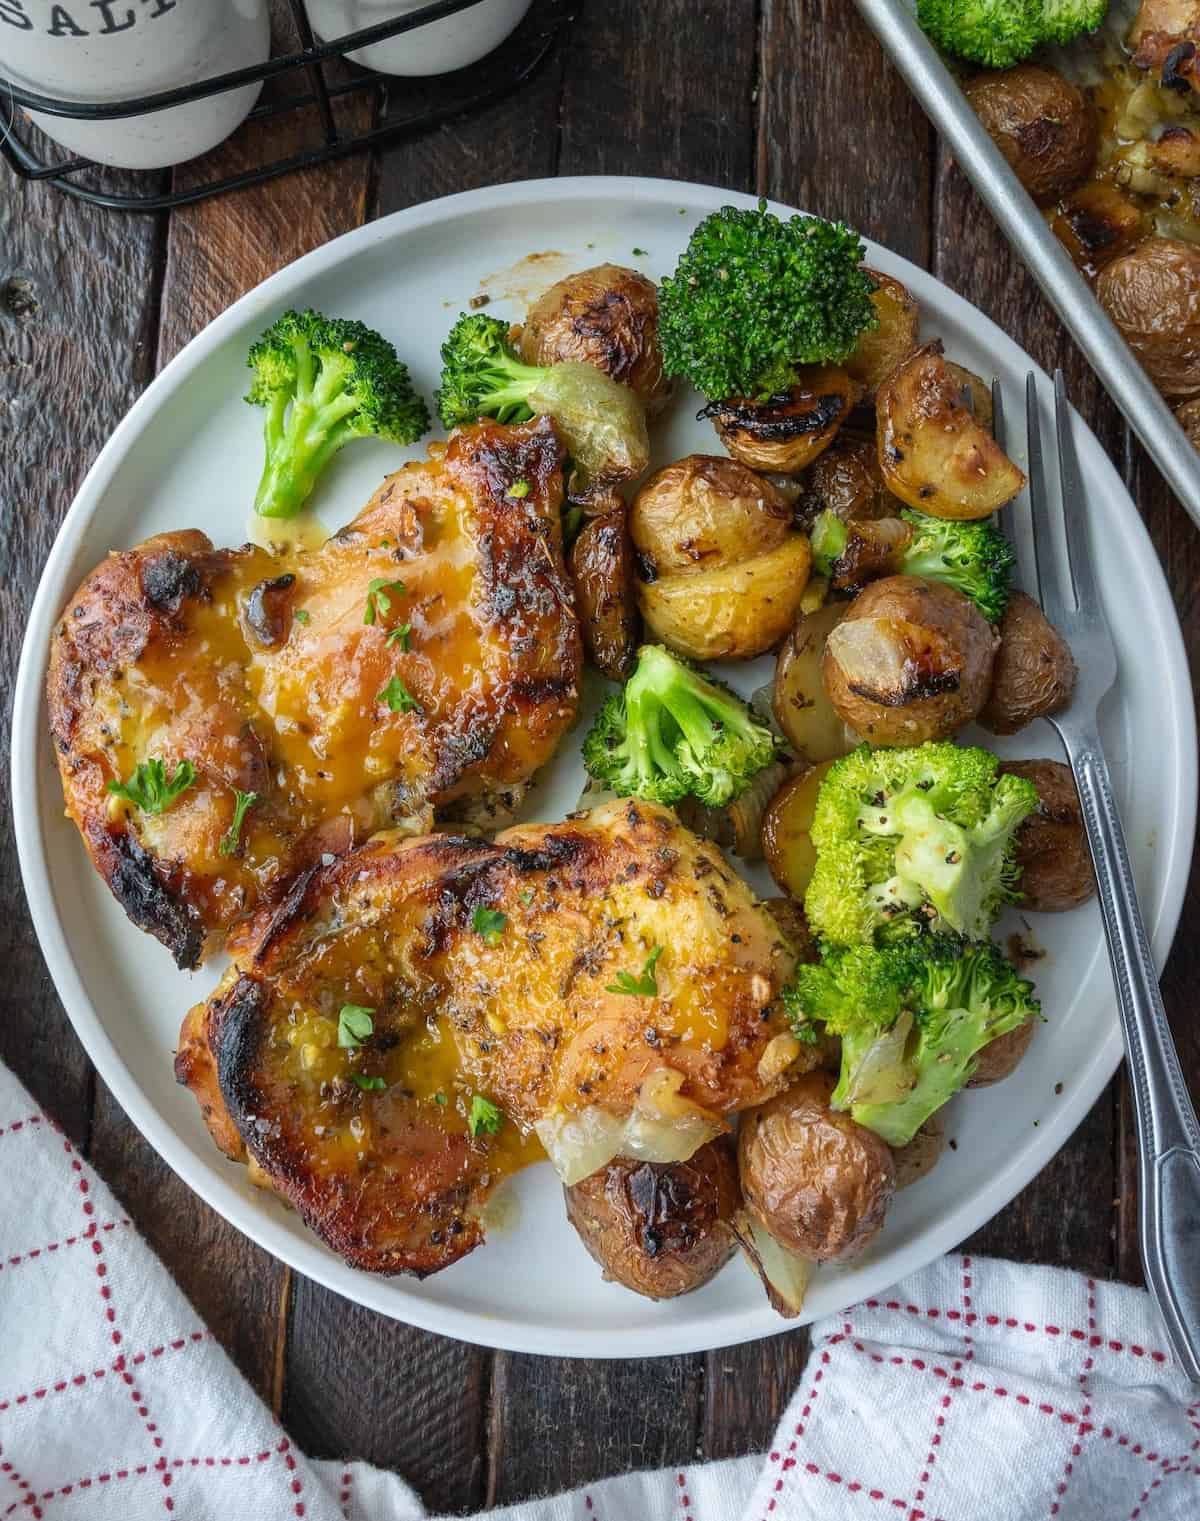 Honey mustard chicken thighs on a plate with broccoli and potatoes.